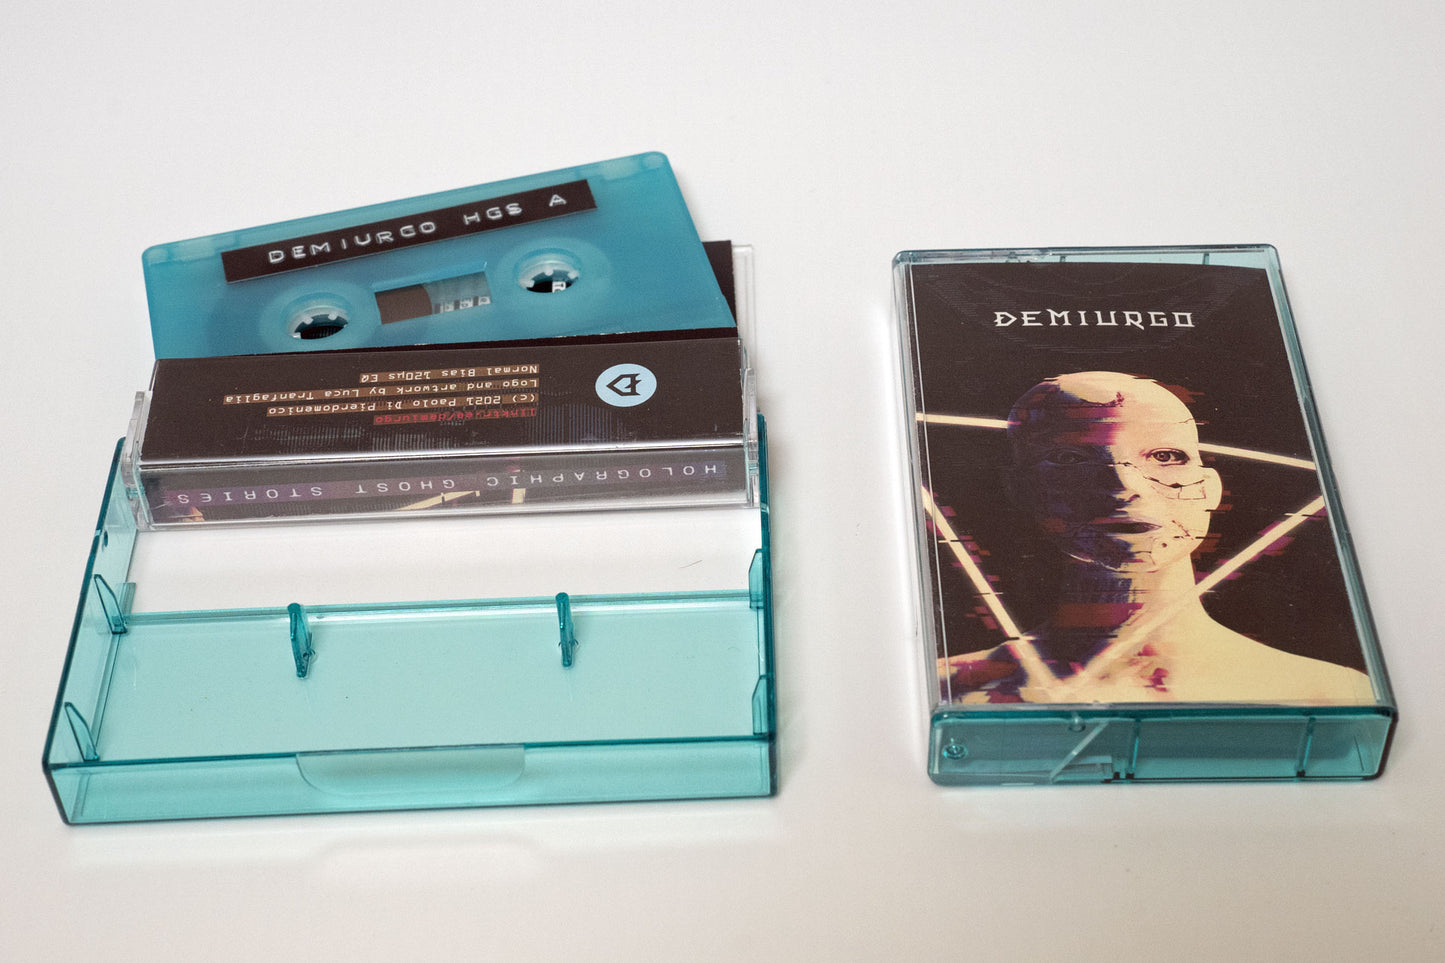 Holographic Ghost Stories Cassette, limited edition, aqua